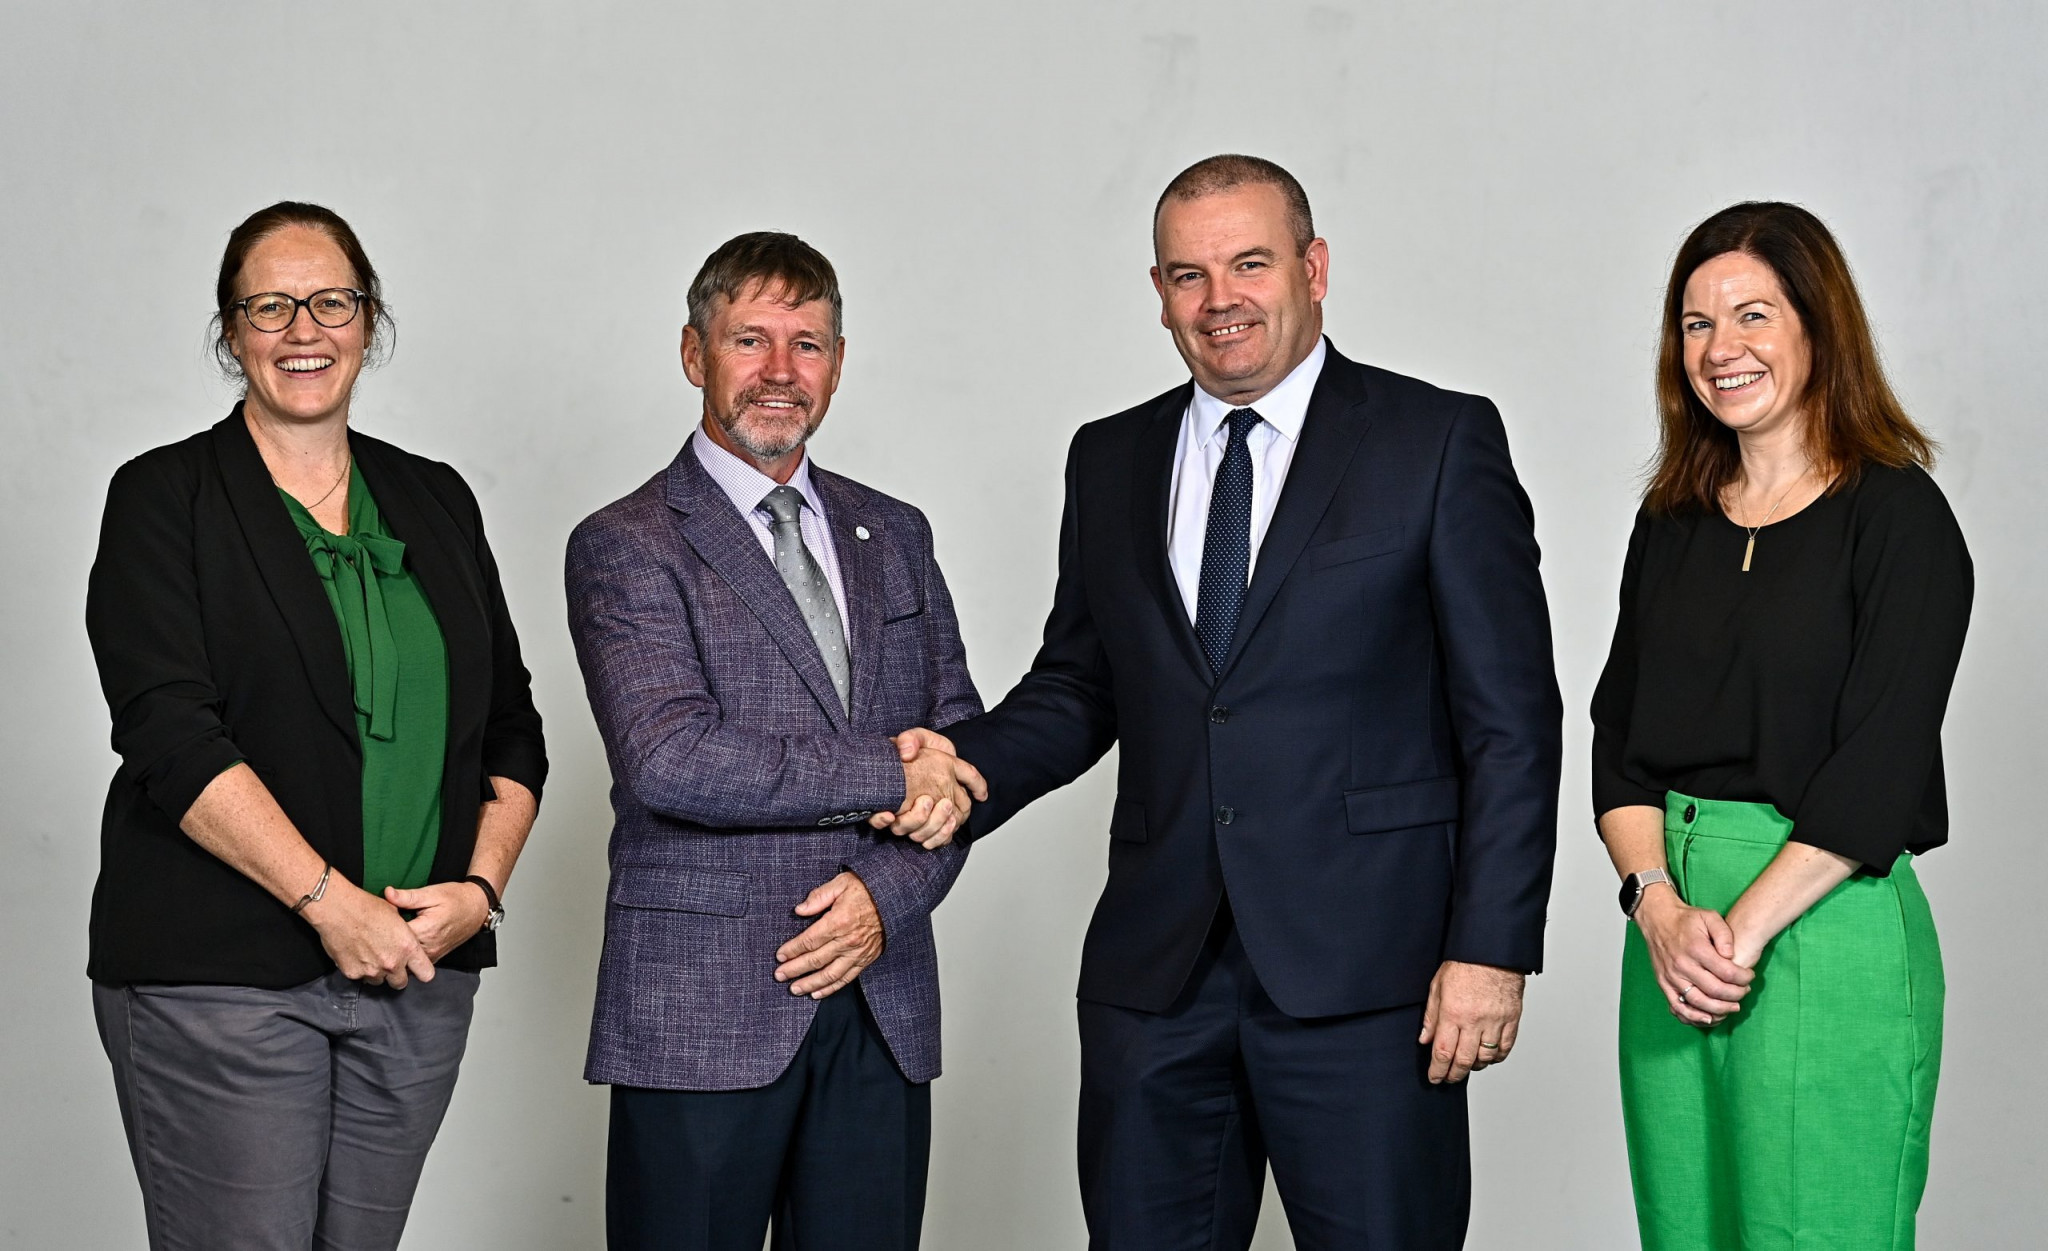 Paralympics Ireland have established a Sport Science and Medicine working group as part of an agreement with the Sport Ireland Institute before Paris 2024 ©Paralympics Ireland